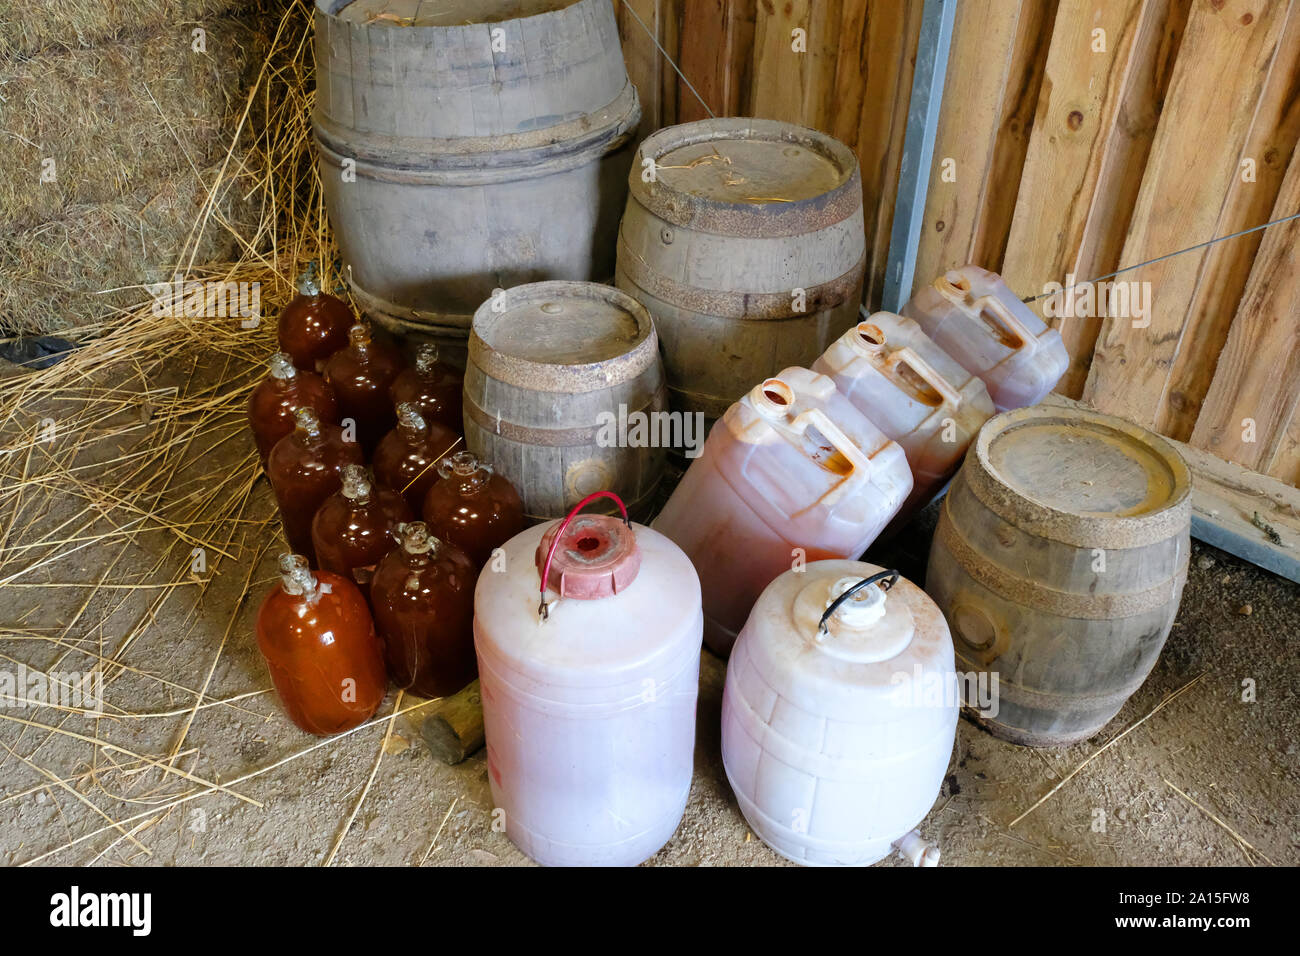 Selection of containers used for storing cider - John Gollop Stock Photo